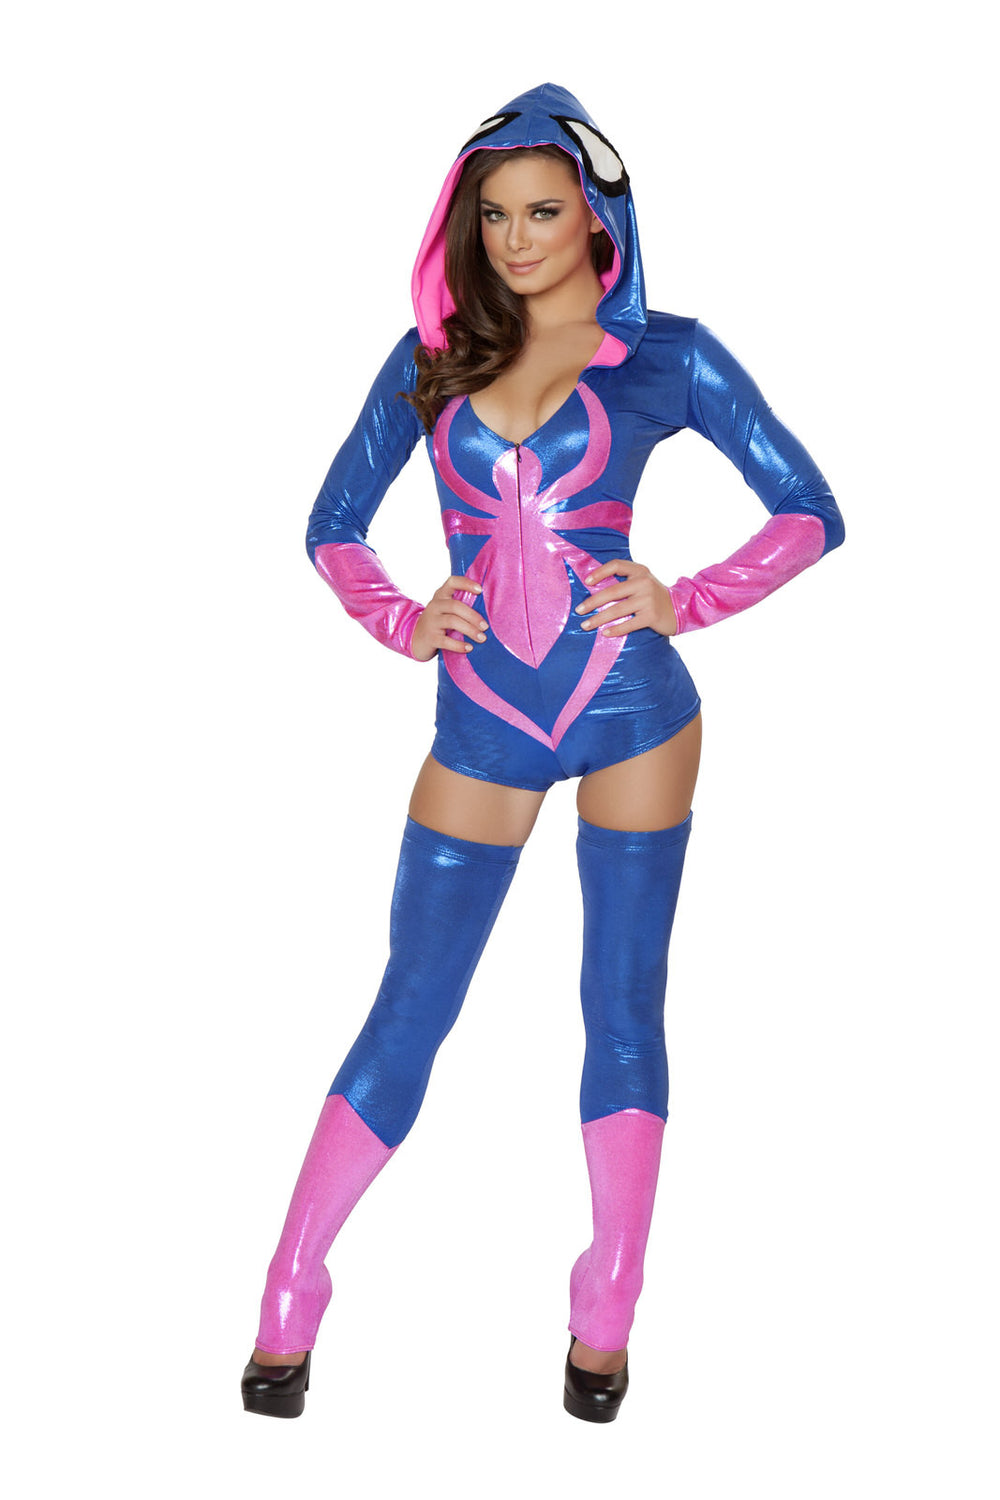 Deadly Pink Spider Costume by J. Valentine in Size S, M, L, or XL